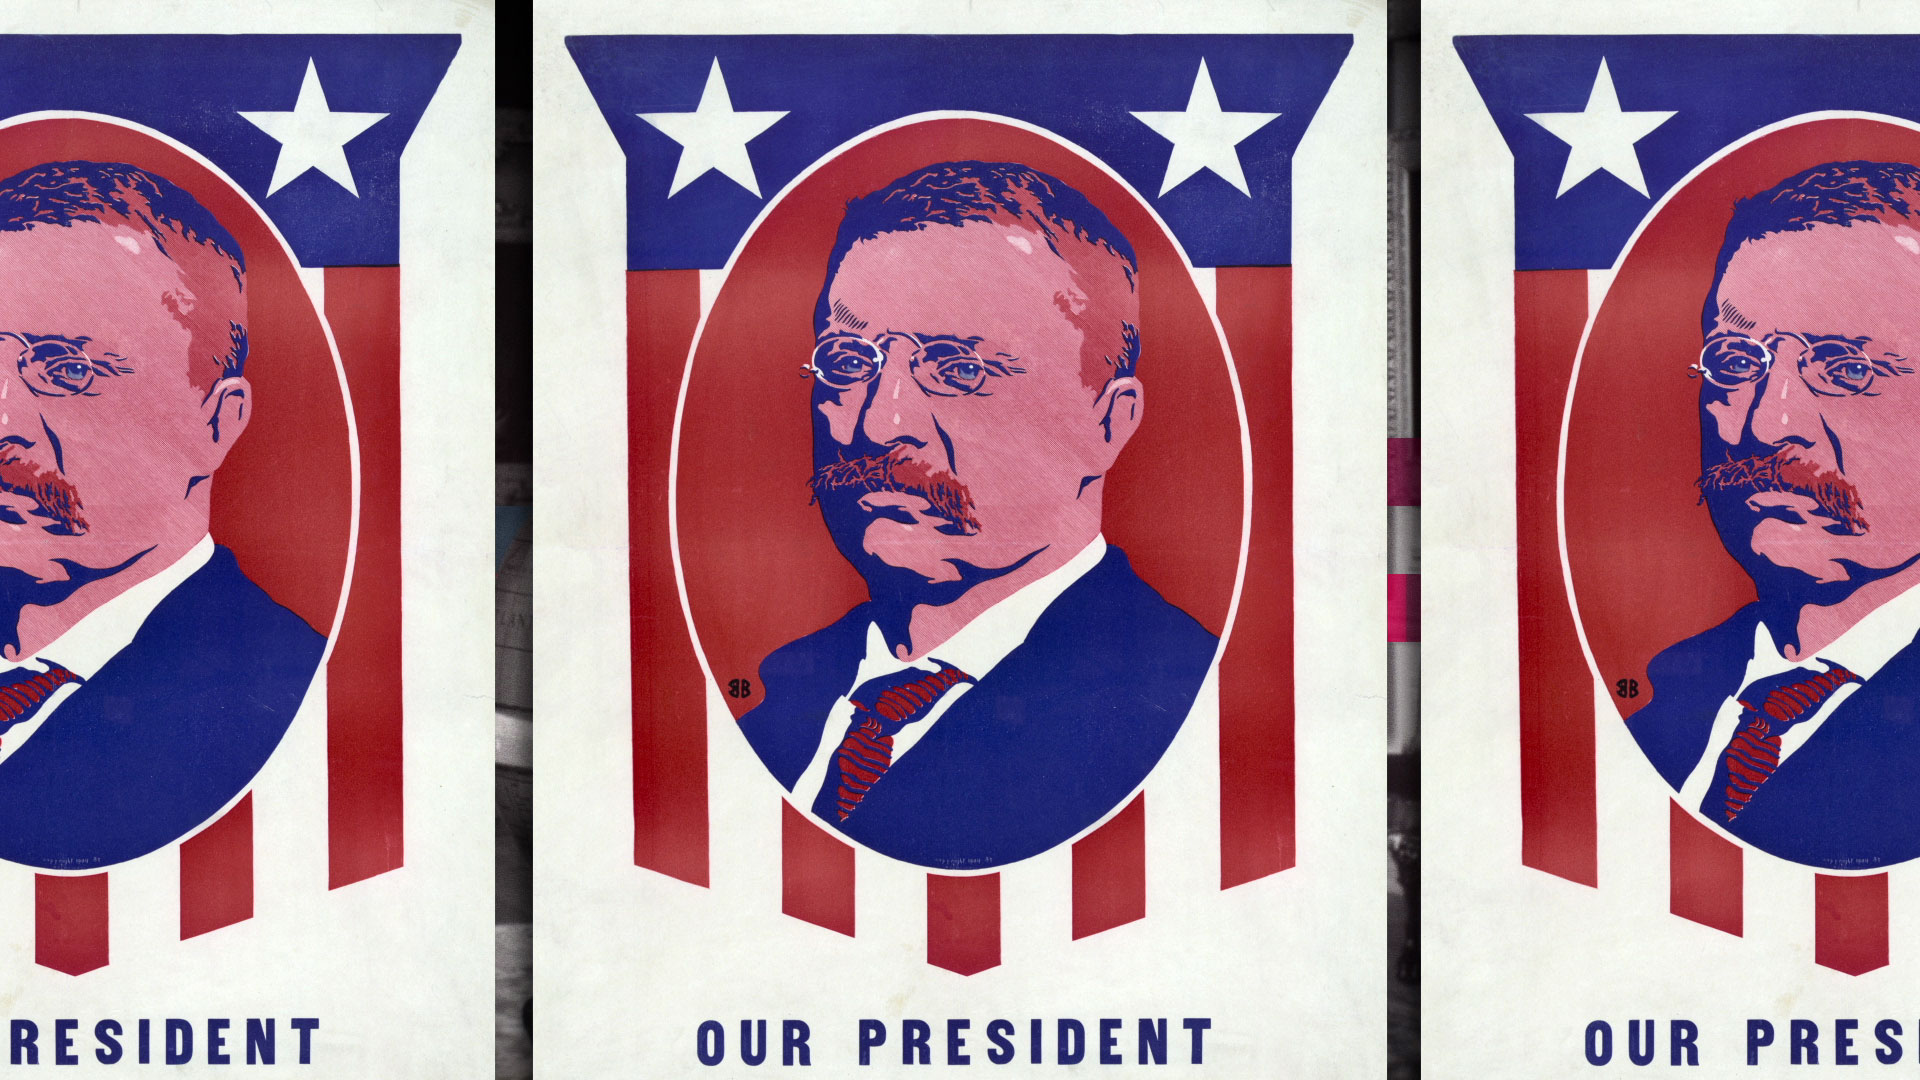 Teddy Roosevelt Takes the Reins After an Assassination